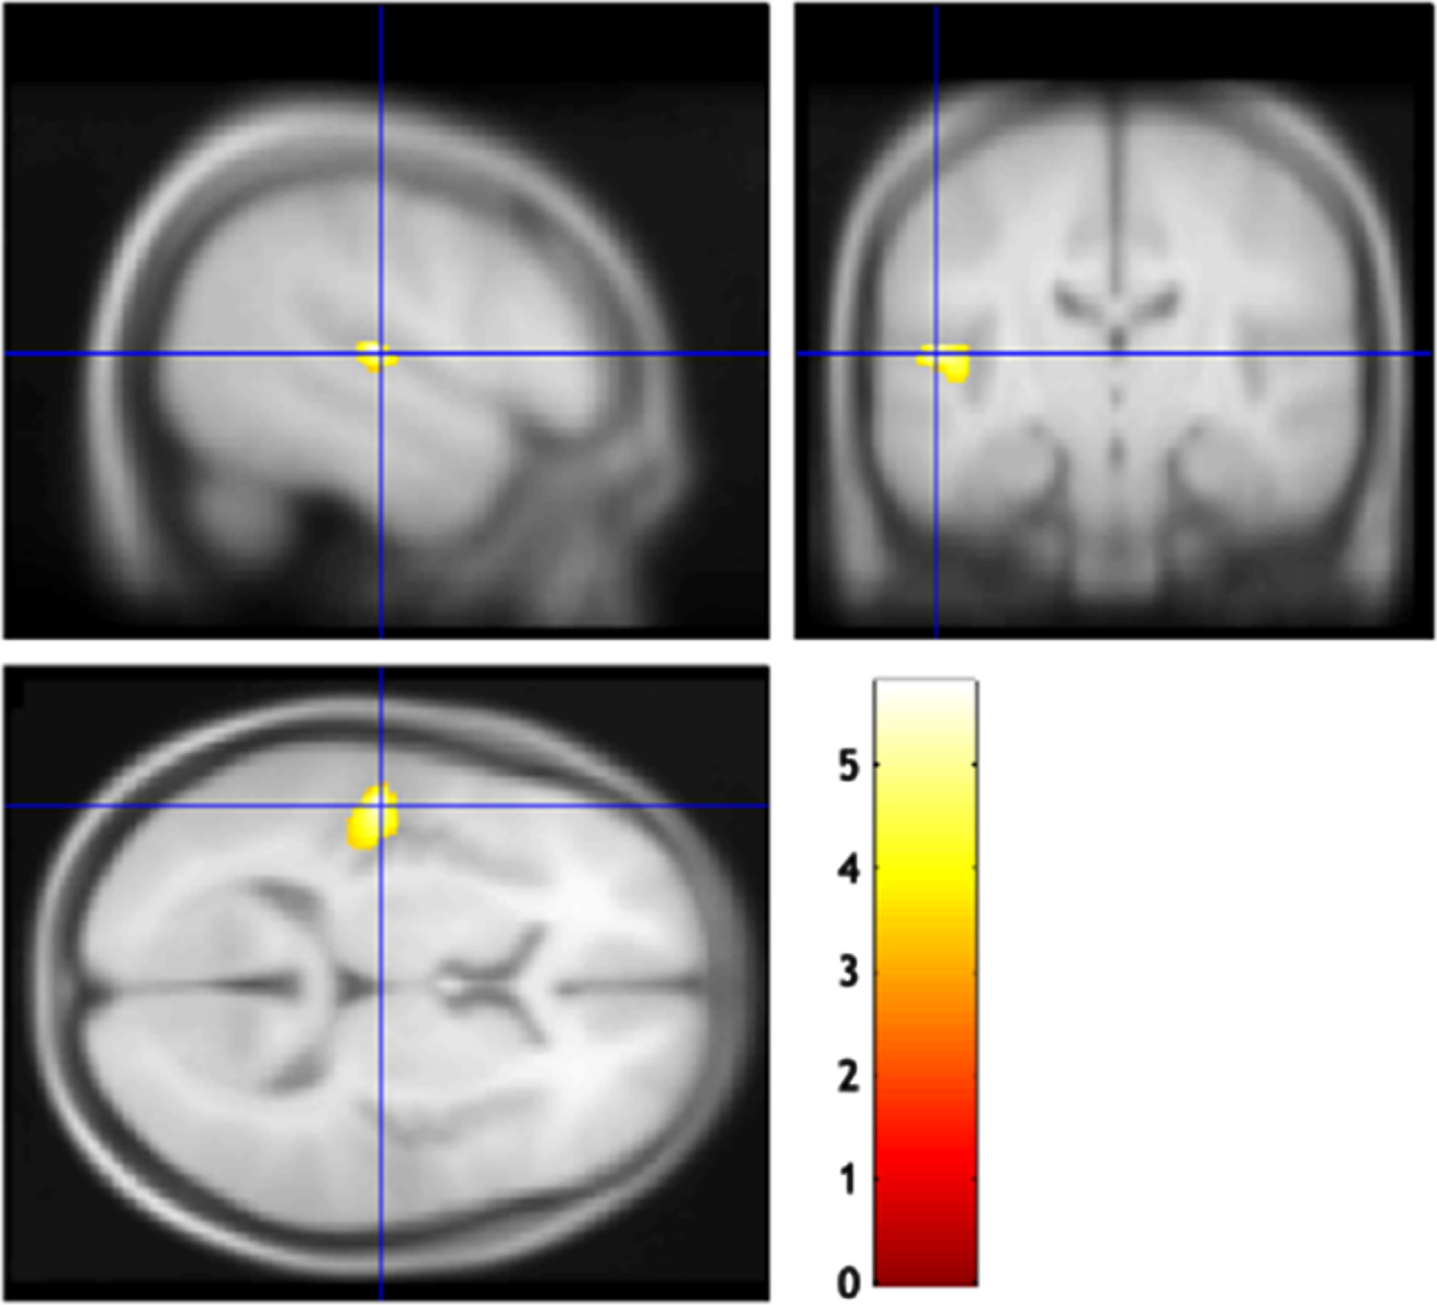 Brain regions correlated with the mild behavioral impairment checklist (MBI-C) impulse dyscontrol score. The gray matter volume of the left superior temporal gyrus was negatively correlated with the MBI-C impulse dyscontrol score.